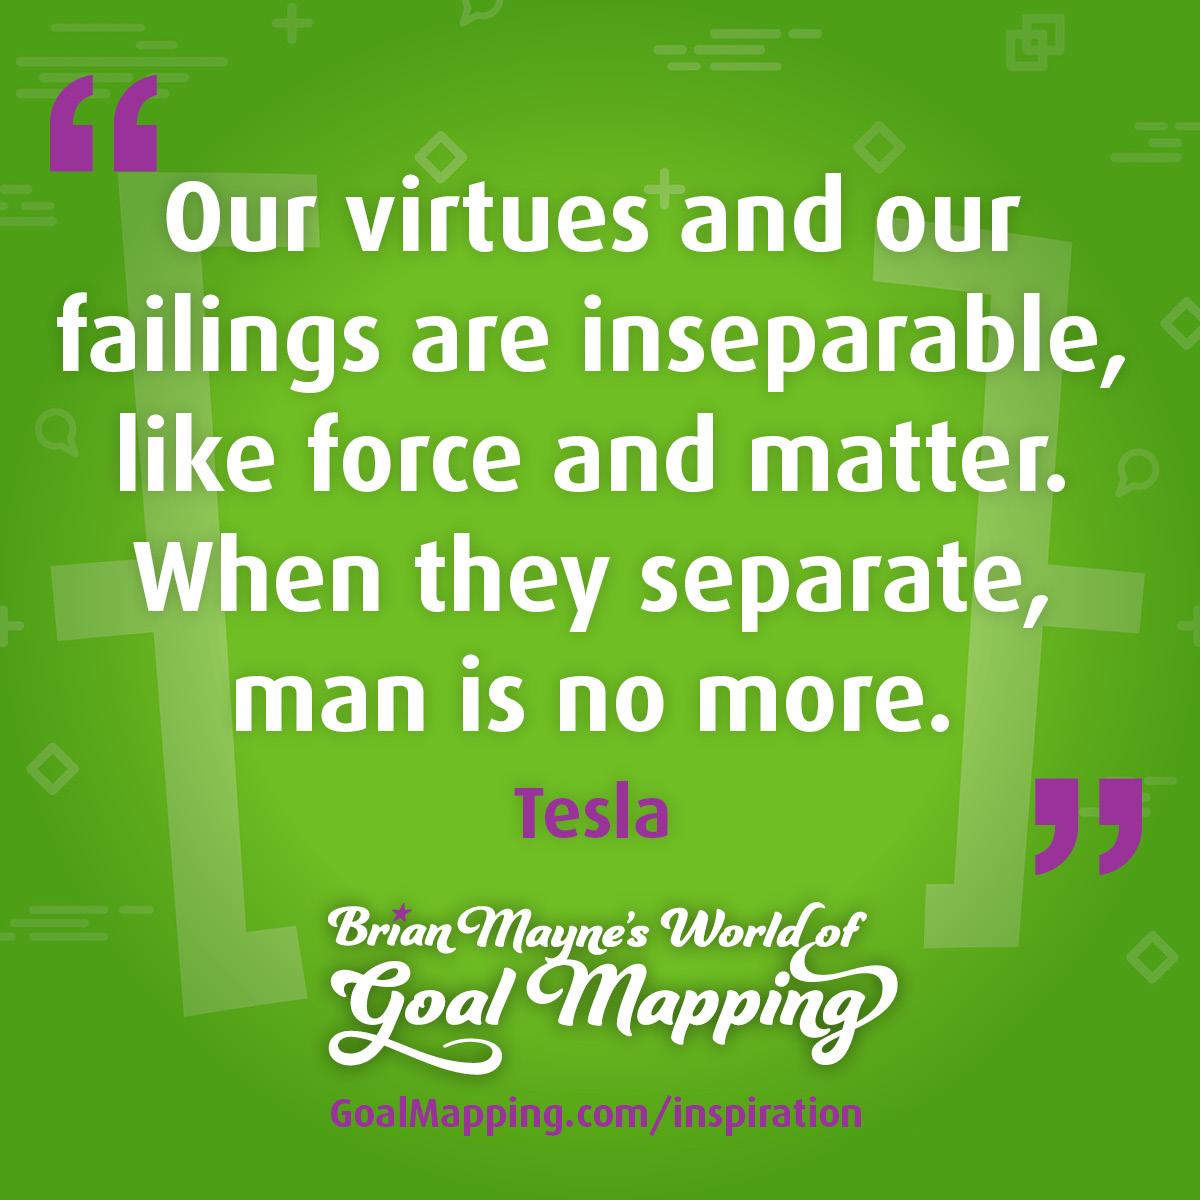 "Our virtues and our failings are inseparable, like force and matter. When they separate, man is no more." Tesla